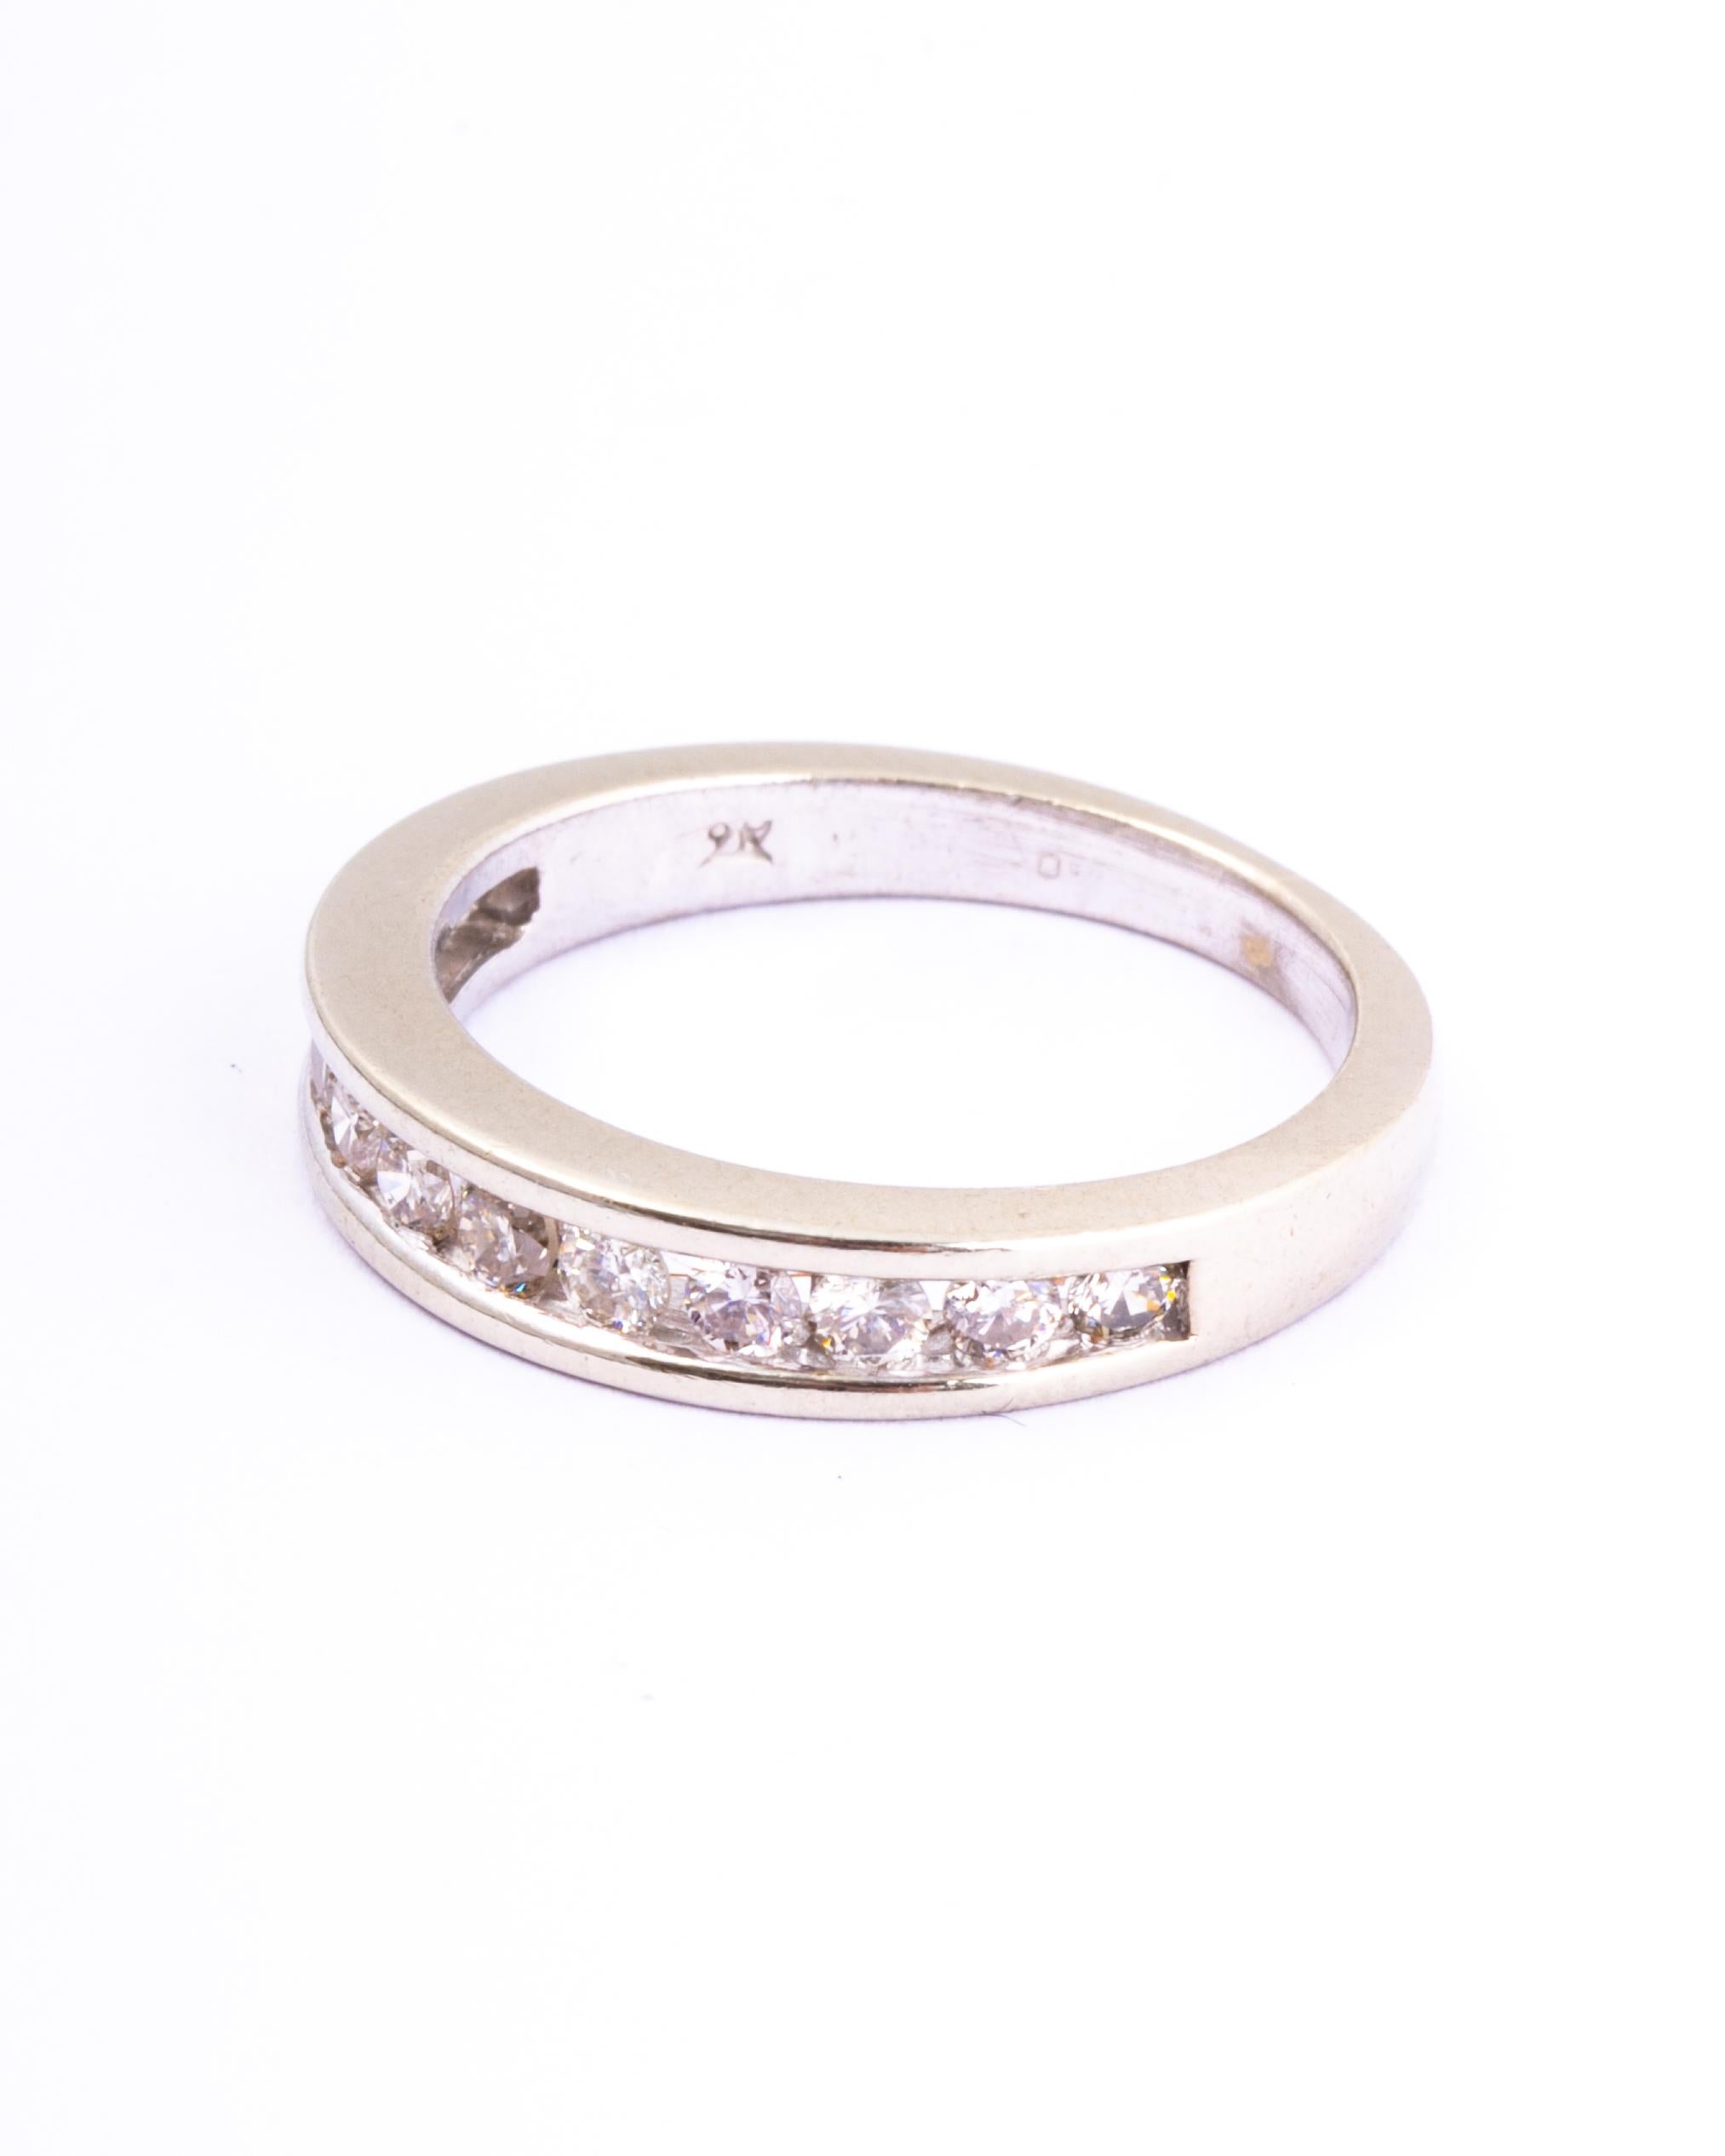 This half eternity band holds 50points worth of shimmering diamonds. The stones are set within the smooth 9ct white gold band. 

Ring Size: J 1/2 or 5 
Band Width: 4.5mm 

Weight: 2.6g